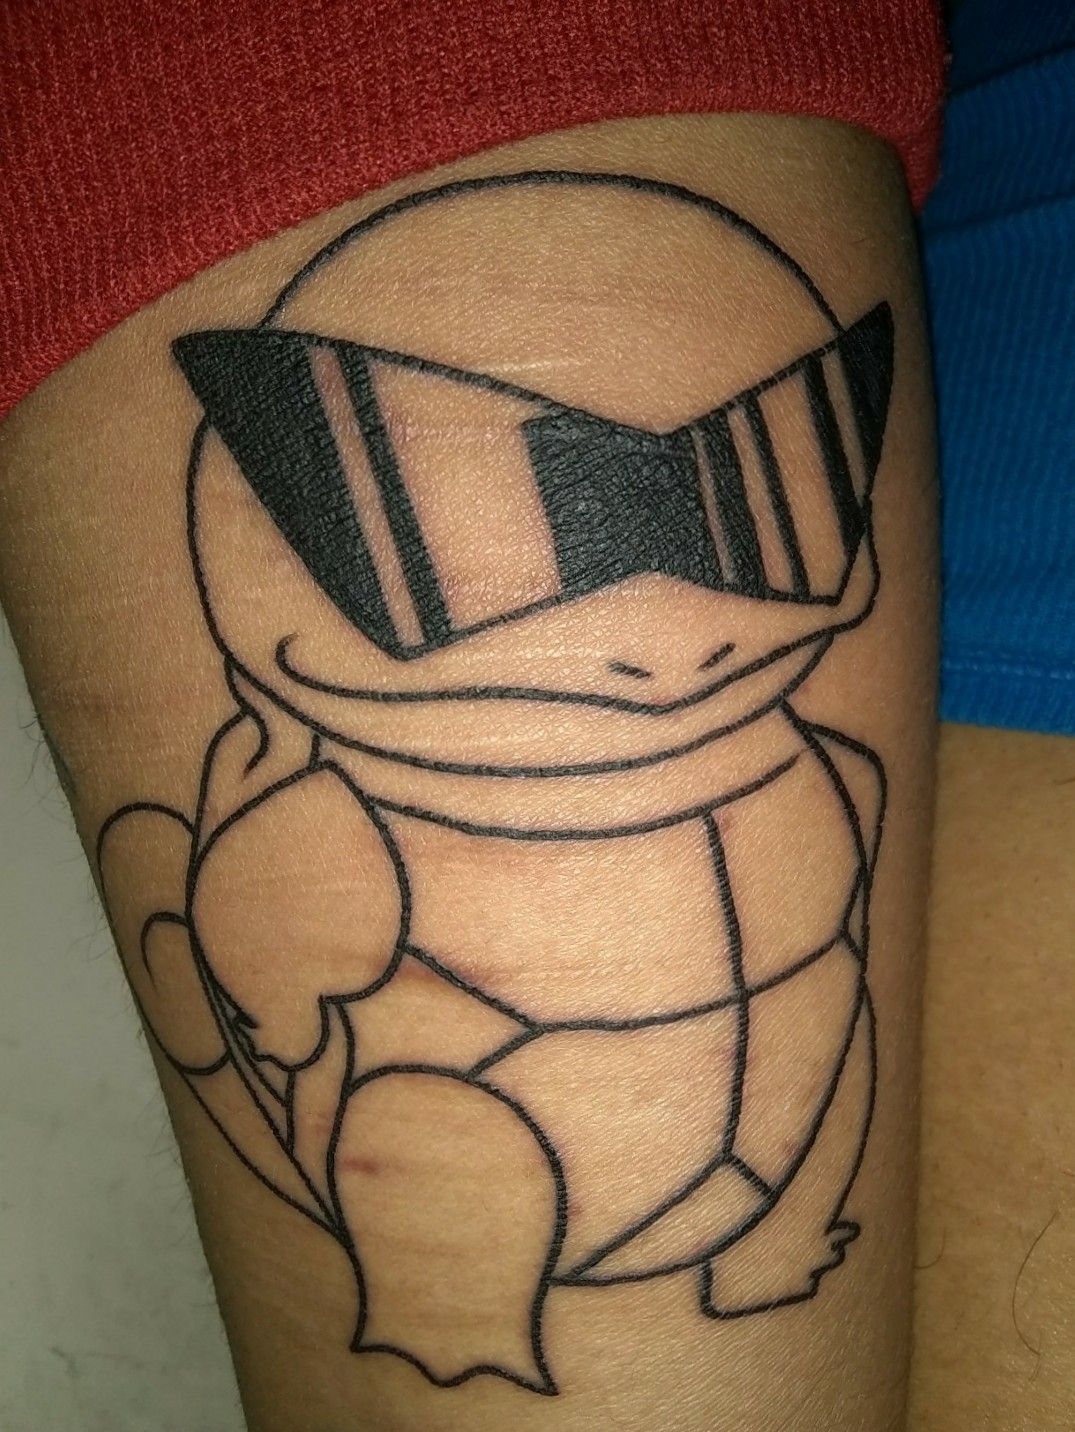 Squad tattoo squirtle Does Logan